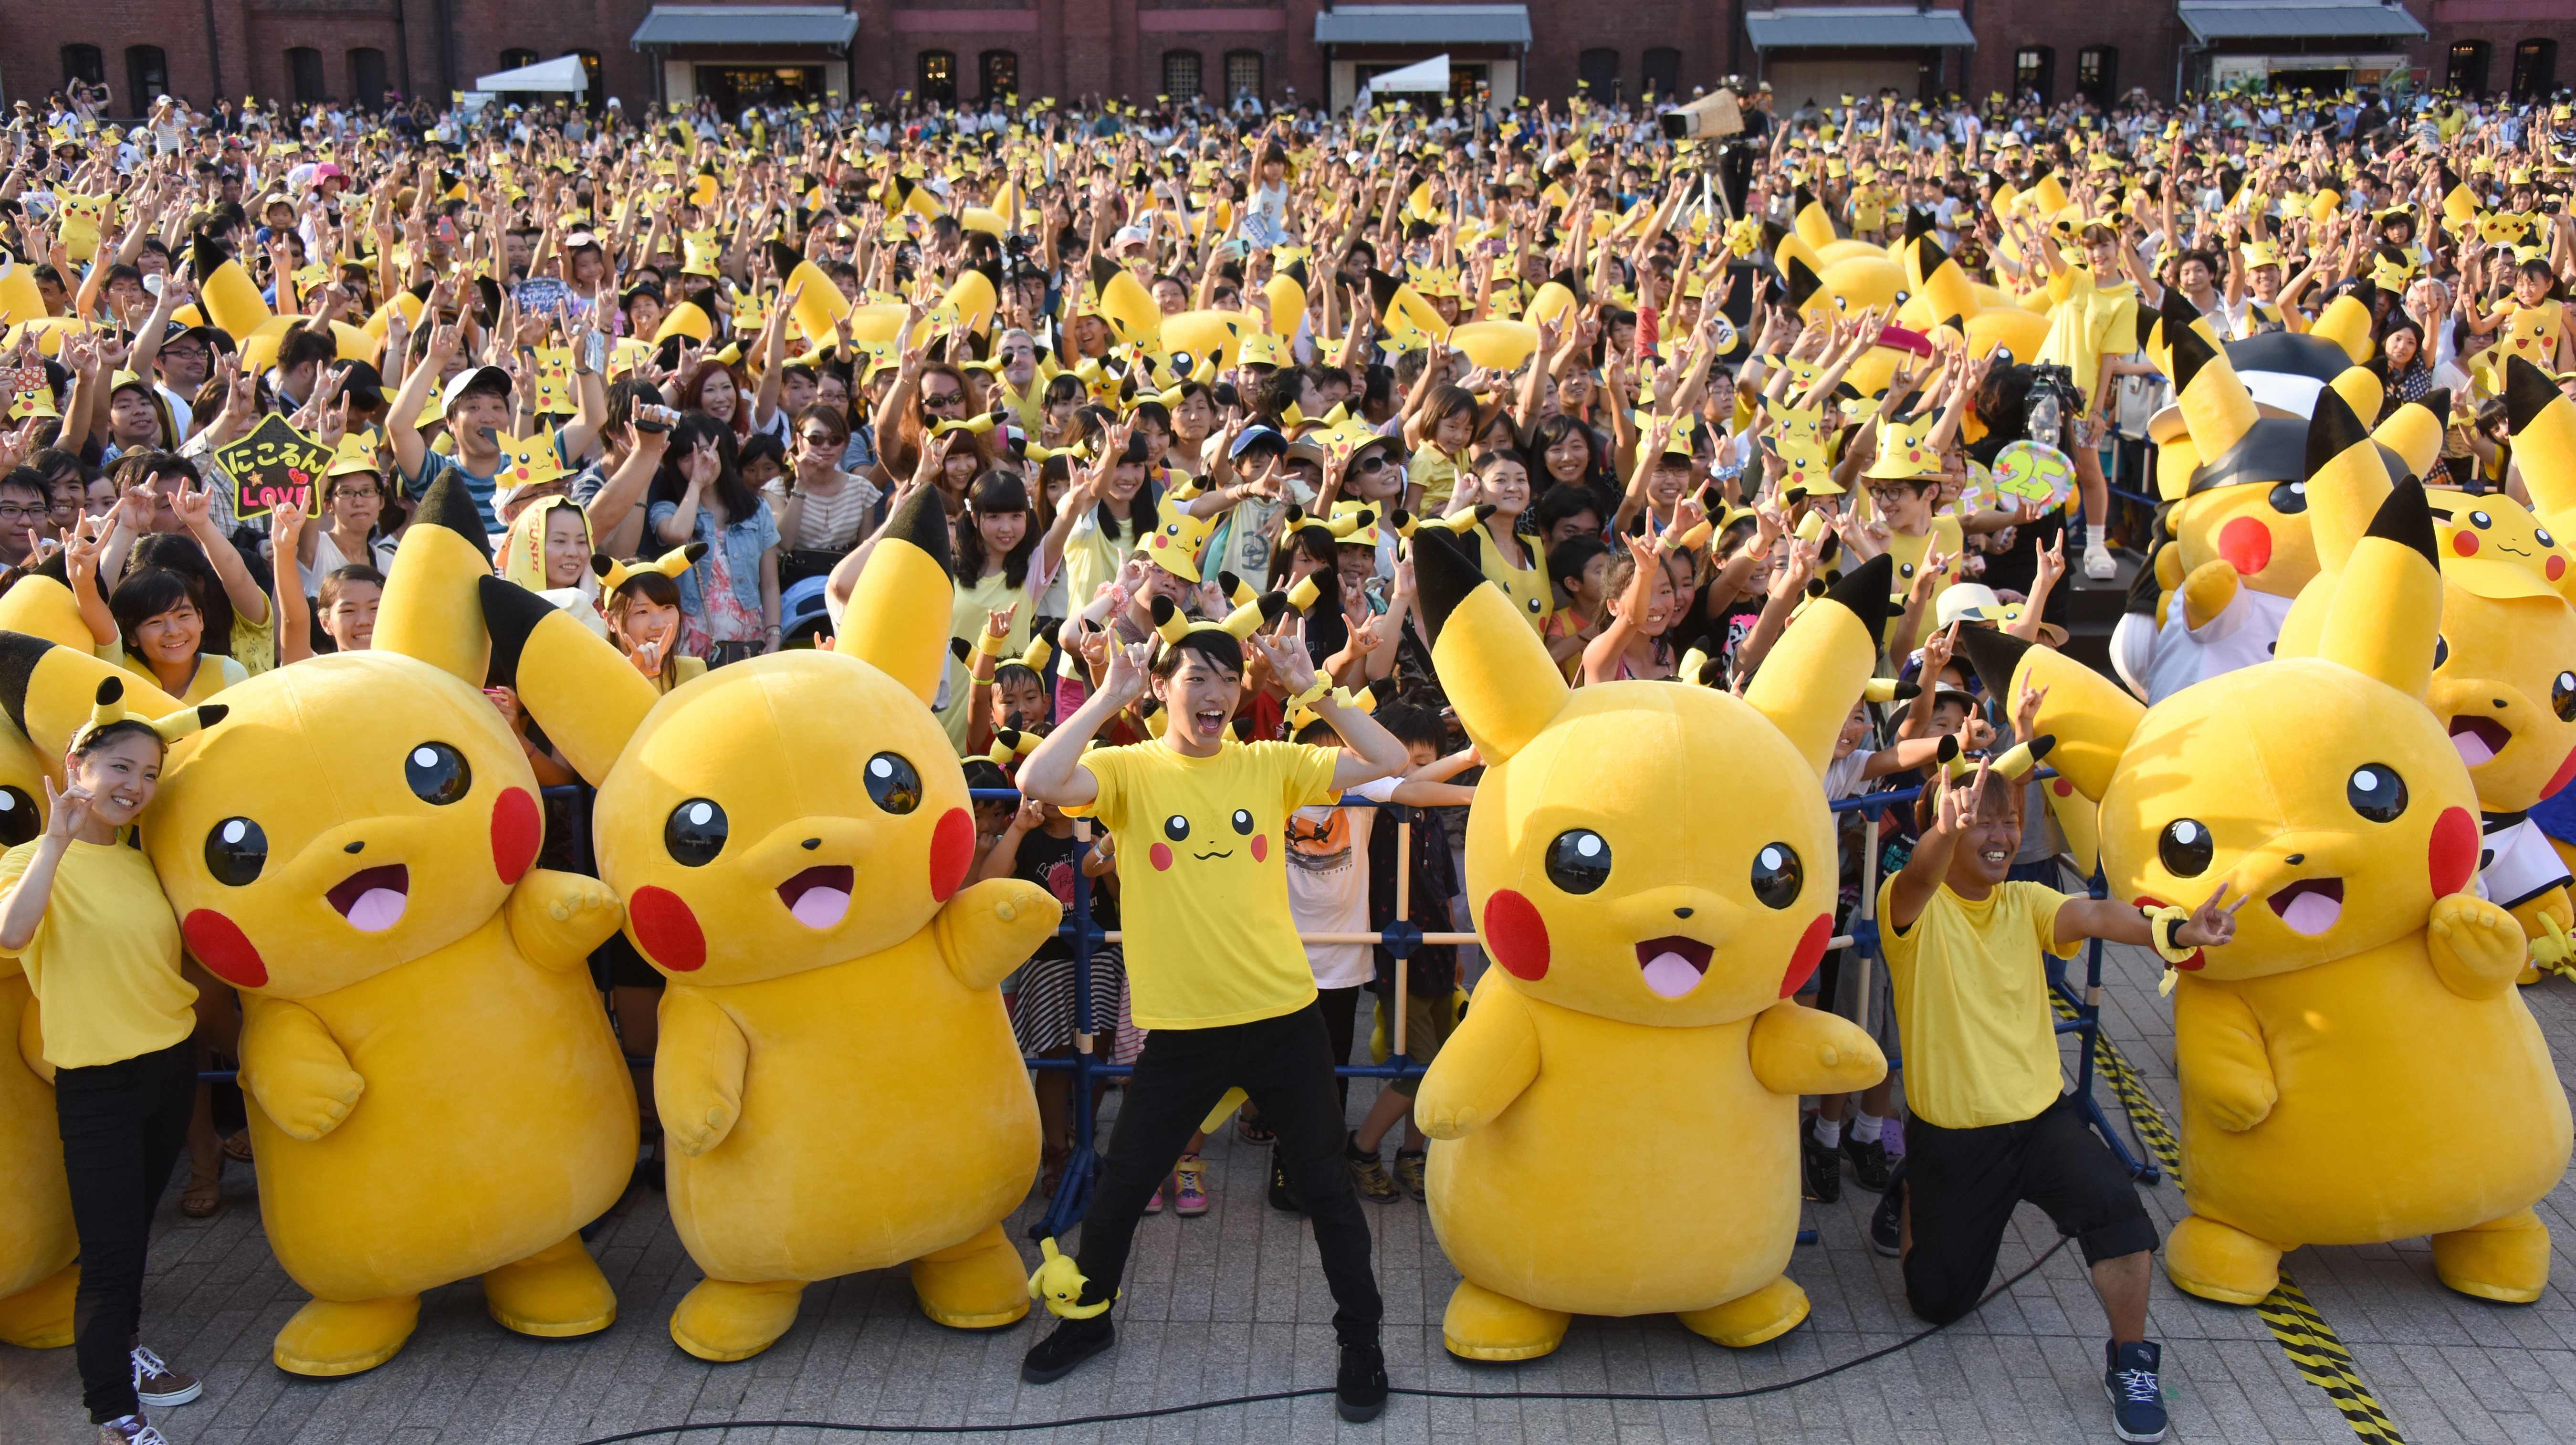 People dressed as Pikachu, a famous Pokemon character, dance with fans at the finale of the nine-day 'Pikachu Outbreak' event in Yokohama last August. | AFP-JIJI